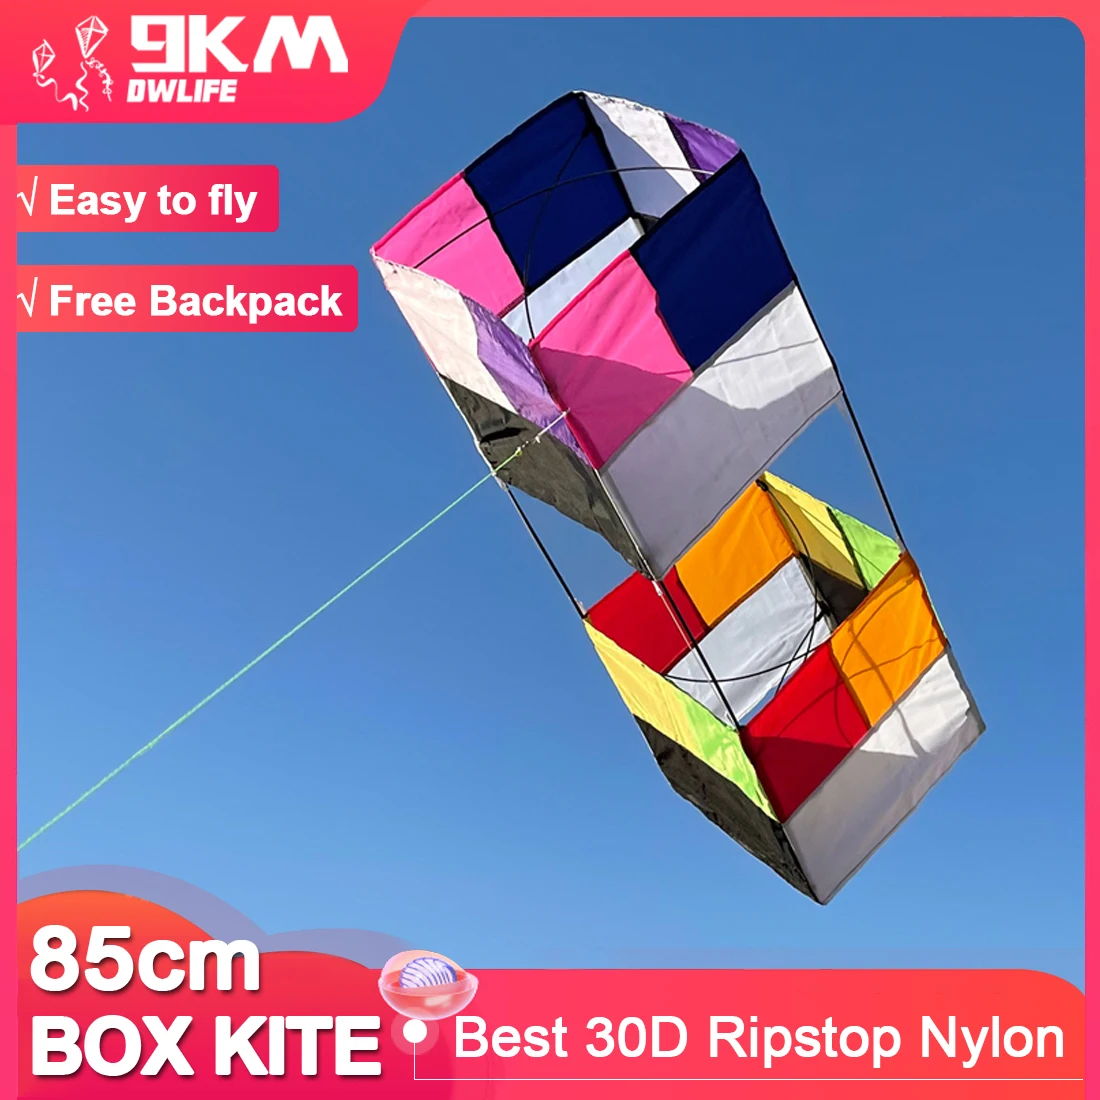 9KM Traditional 3D Box Kite 85cm*30cm For Kids Easy to Fly Fun Toys Sports - $41.38